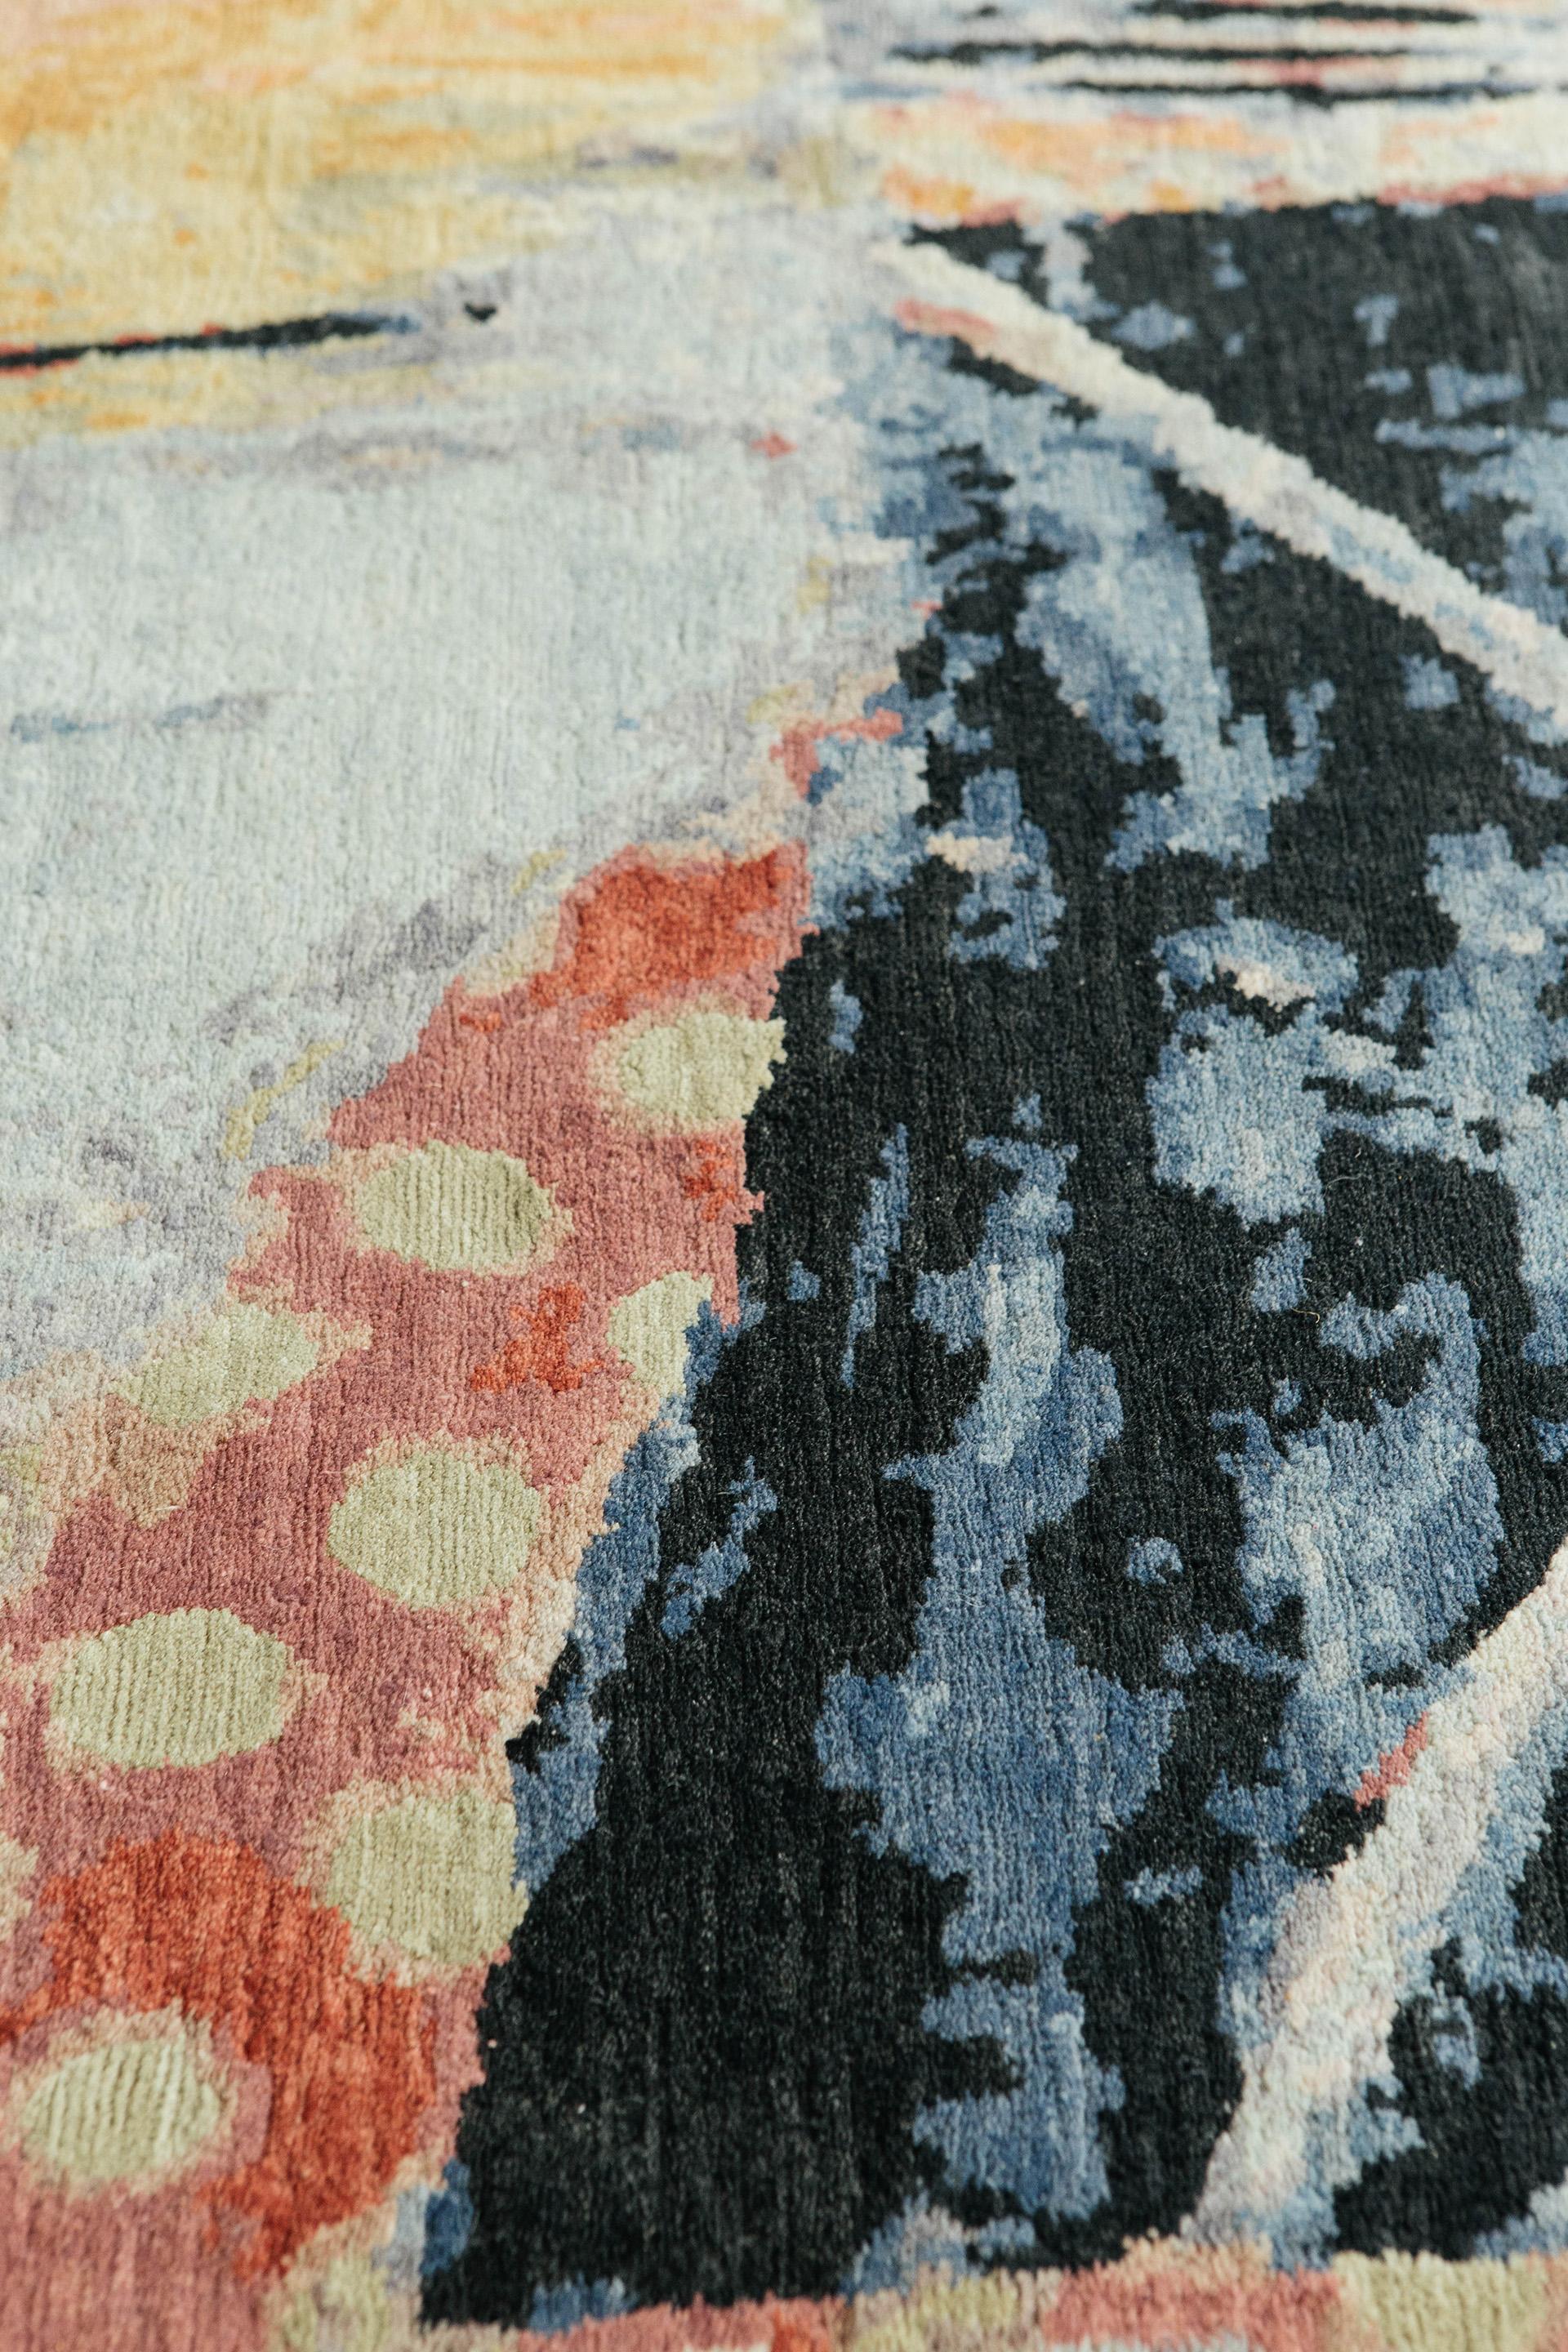 A colorful abstract piece that keeps one's eyes engaged and evokes passionate and positive vibes. Can you feel the +Energy in this wool and silk pile weave? We sure can.

Rug number 26450
Size: 8' 11